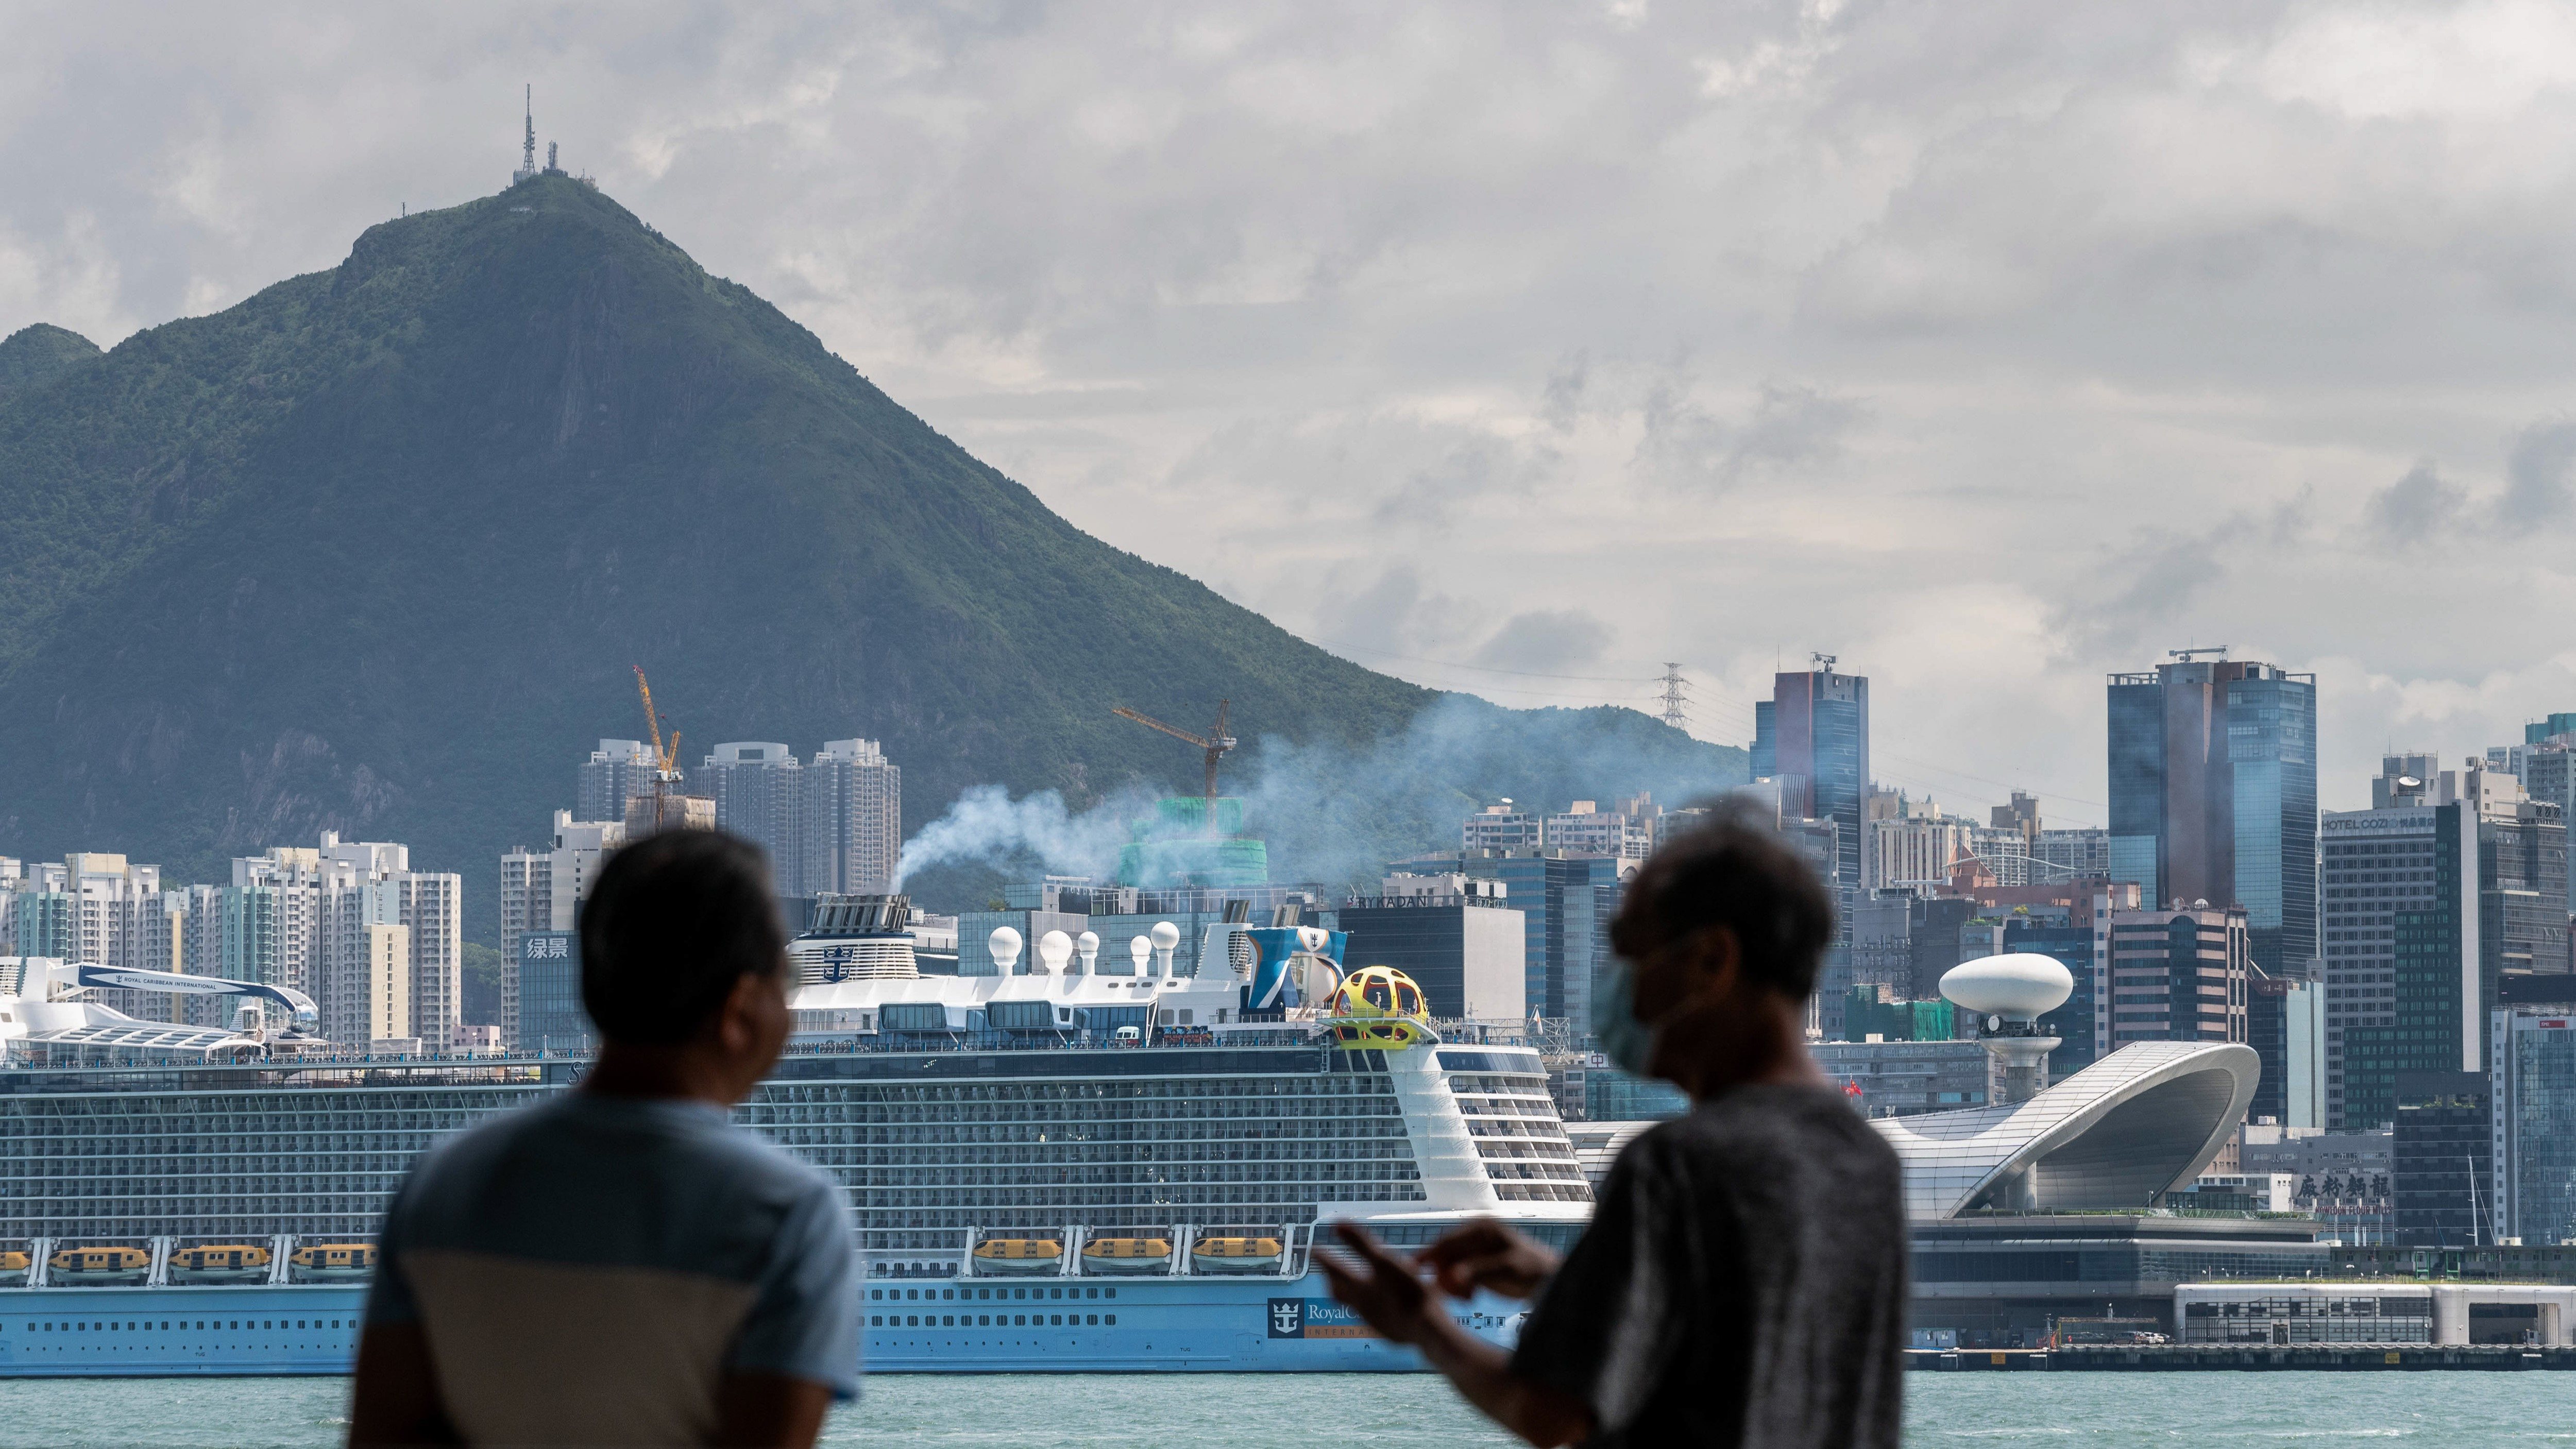 Two men have a conversation as Royal Caribbean International's Spectrum of the Seas docked across the harbour at the Kai Tak Cruise Terminal in Hong Kong.